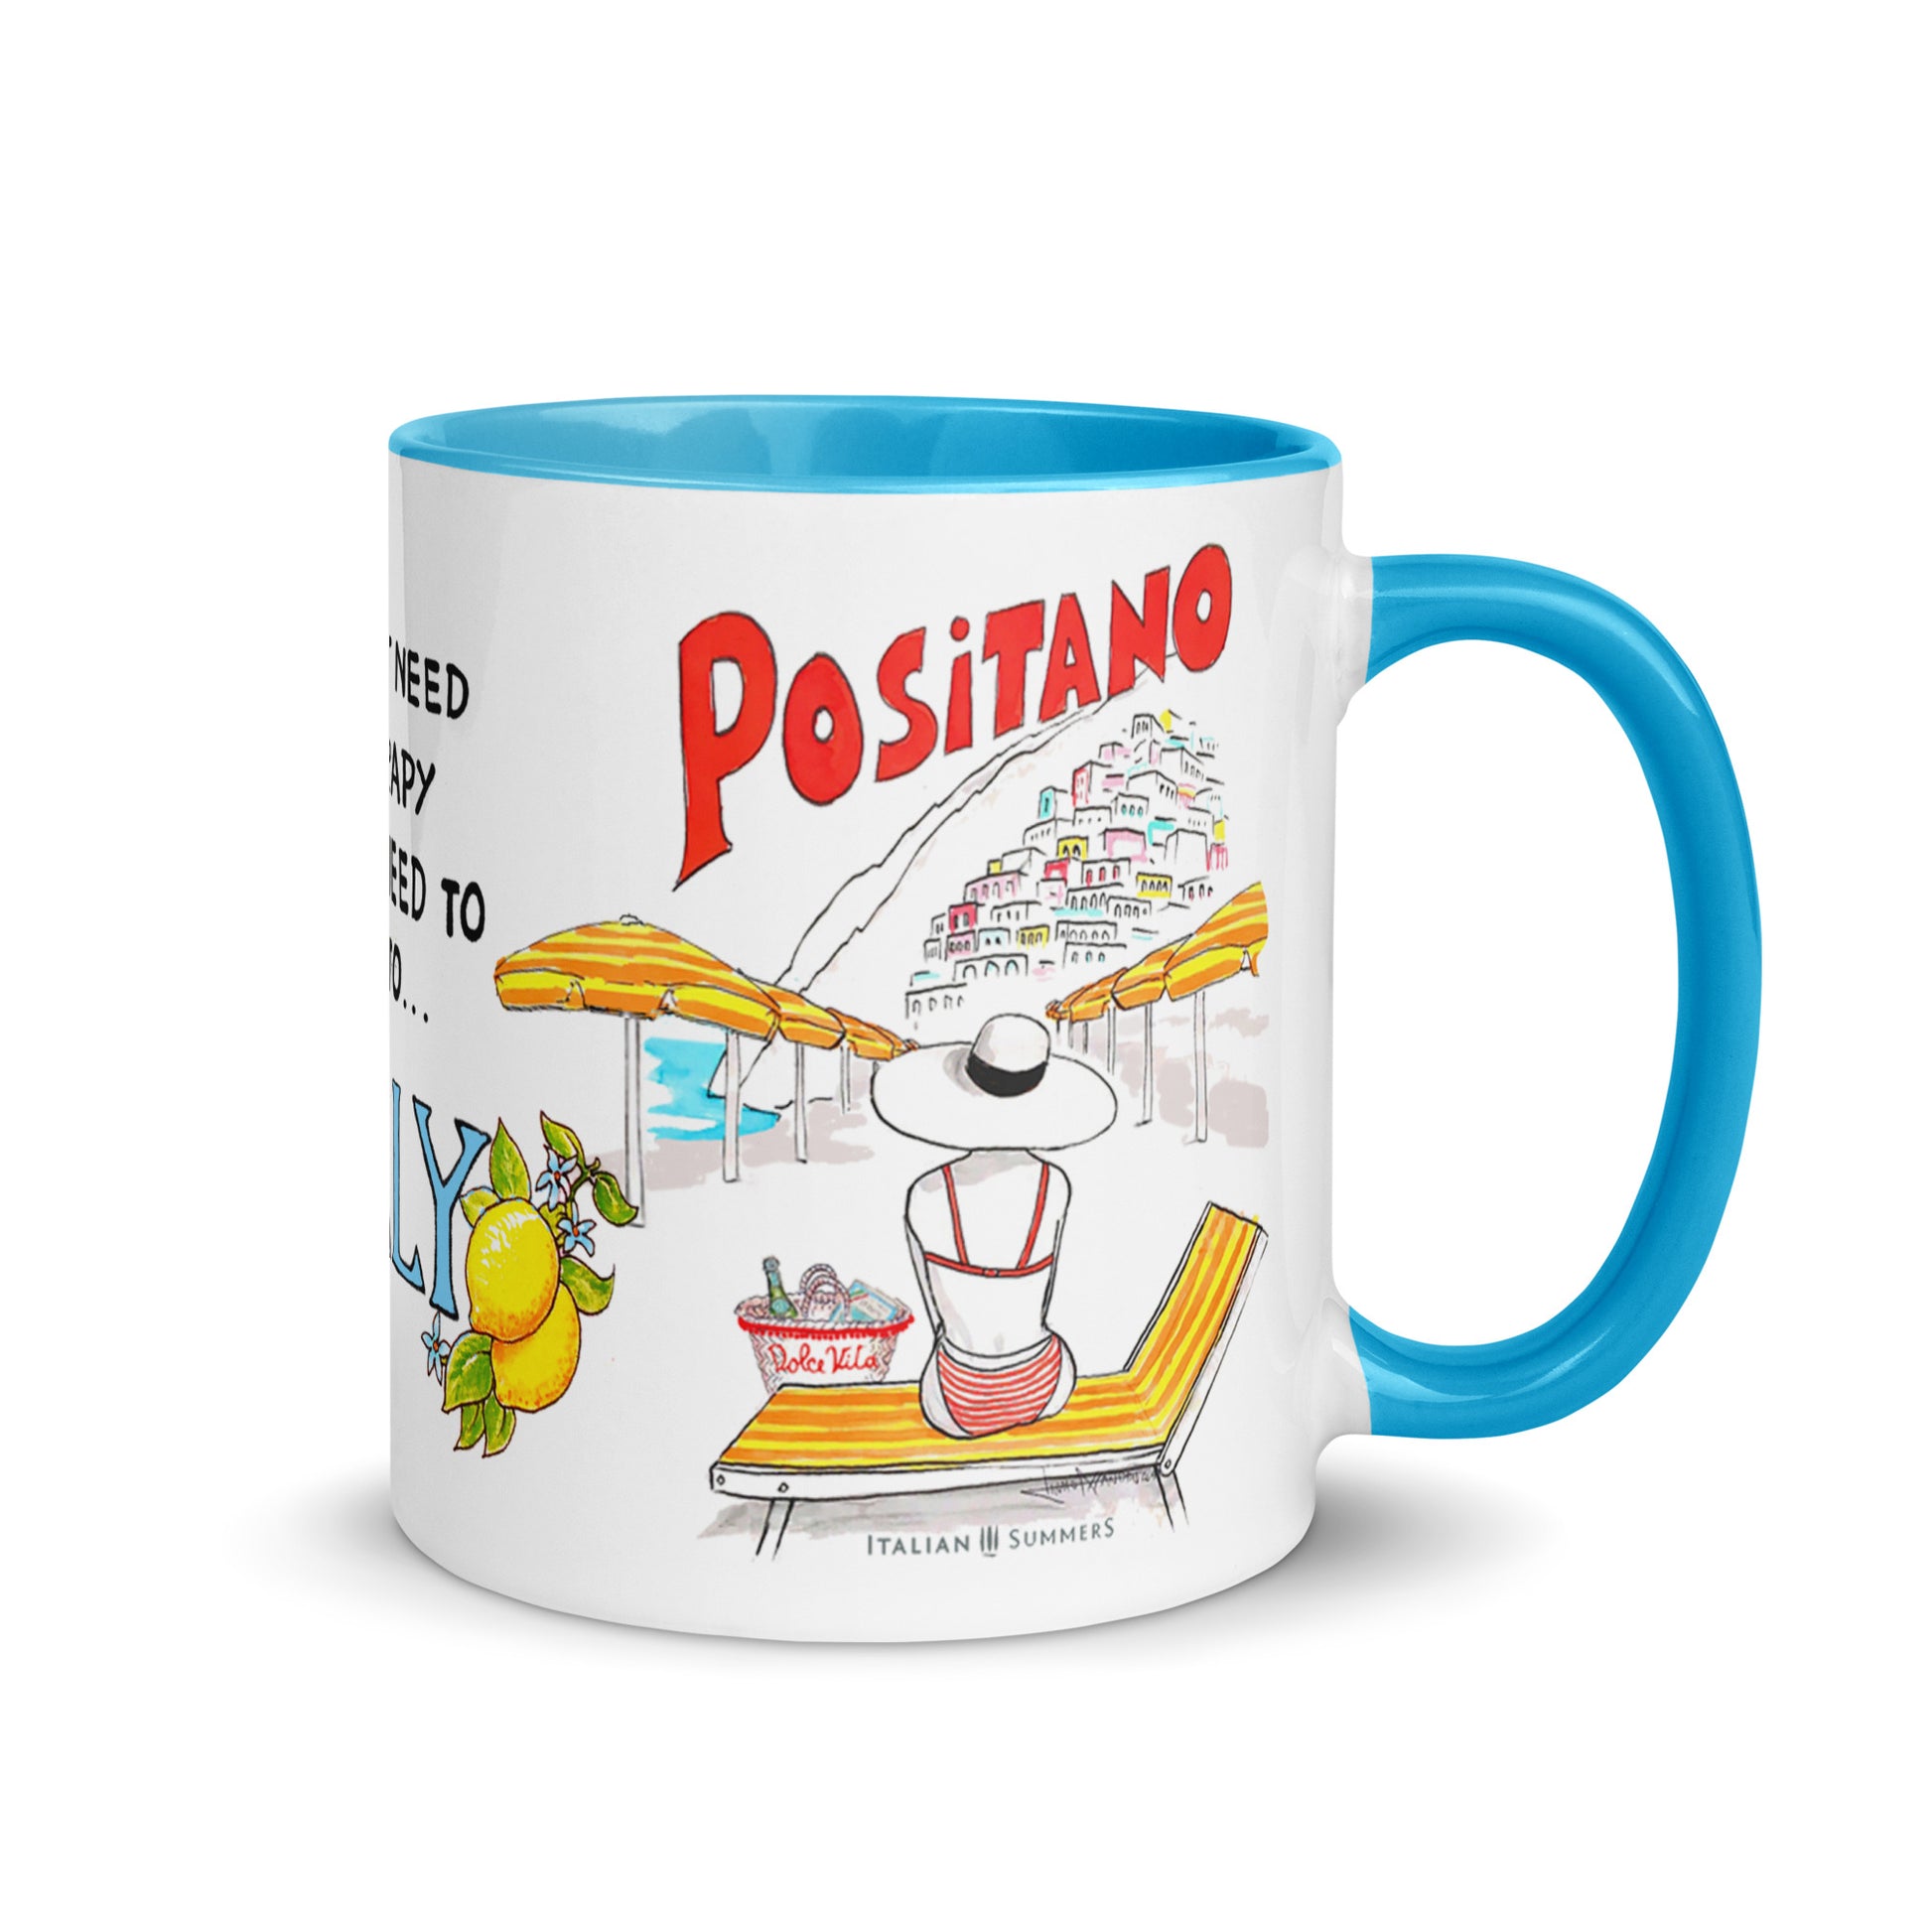 Mug inspired by Positano with a sketch of Positano beach with the yellow orange beach umbrellas and a view and on Positano. There is a lady sittng on a striped beach bed, she wears a hat and has a straw bag with Dolce Vita written on it. This sketch is on tweo sides of the mug and in the center there is the quote I don't need therapy, I just need to go to Italy. There is also Positano written on the mug is red above the village of Positano. The quote is decorated with lemons.